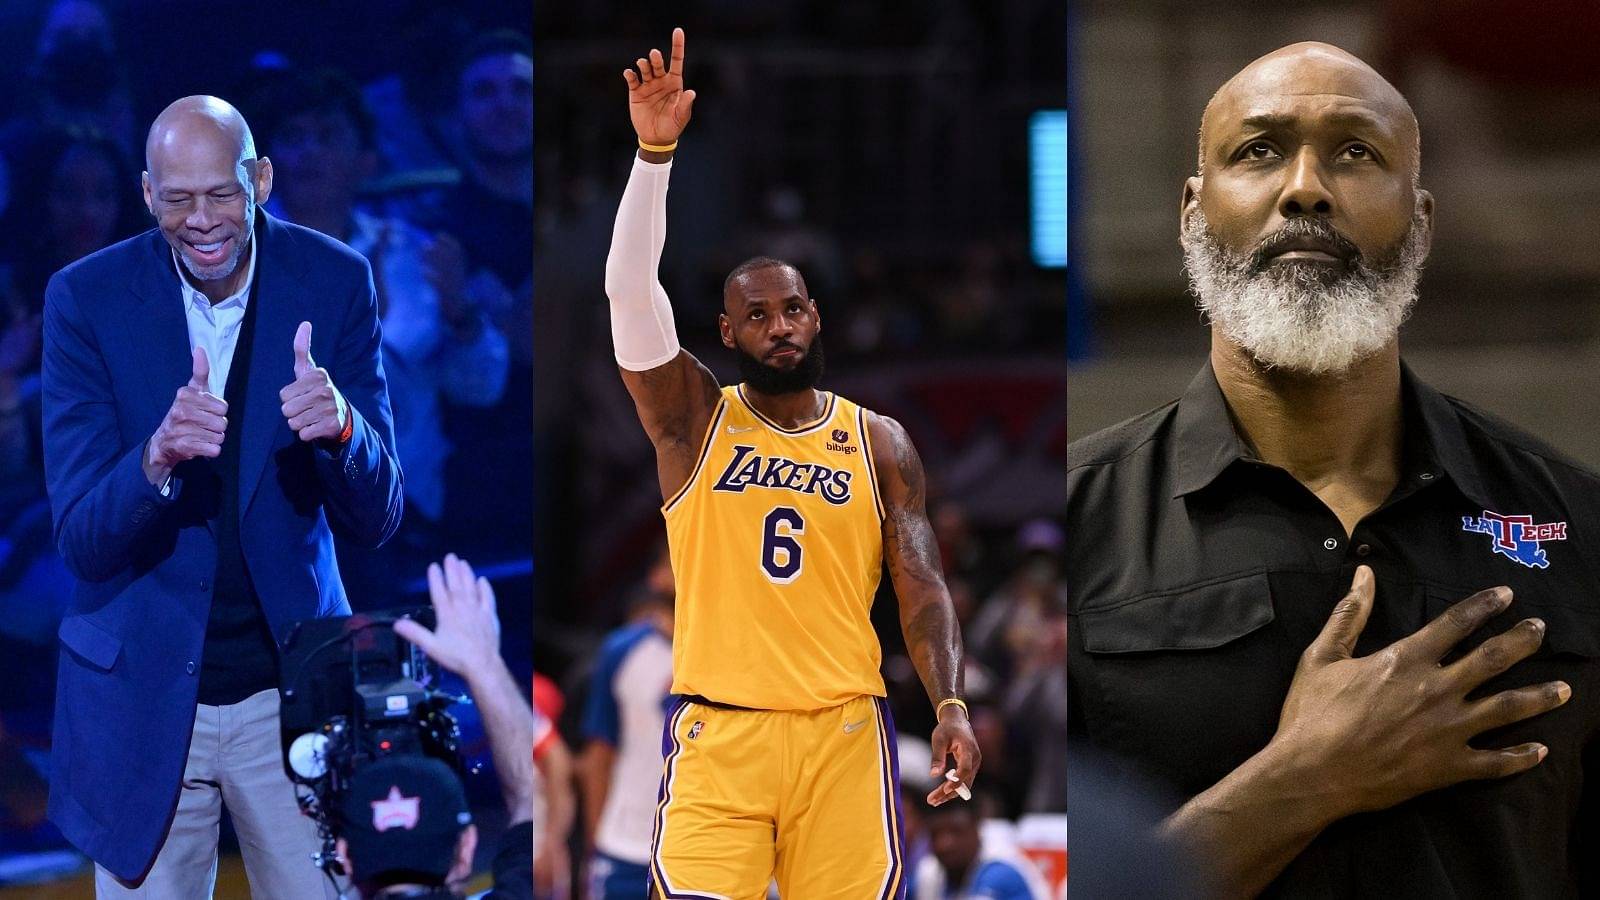 "If the Mailman couldn't, I don't see LeBron James challenging Kareem Abdul-Jabbar's record": A Reddit debate from 8 years ago shows how insane is it do what the Lakers superstar is doing at his age